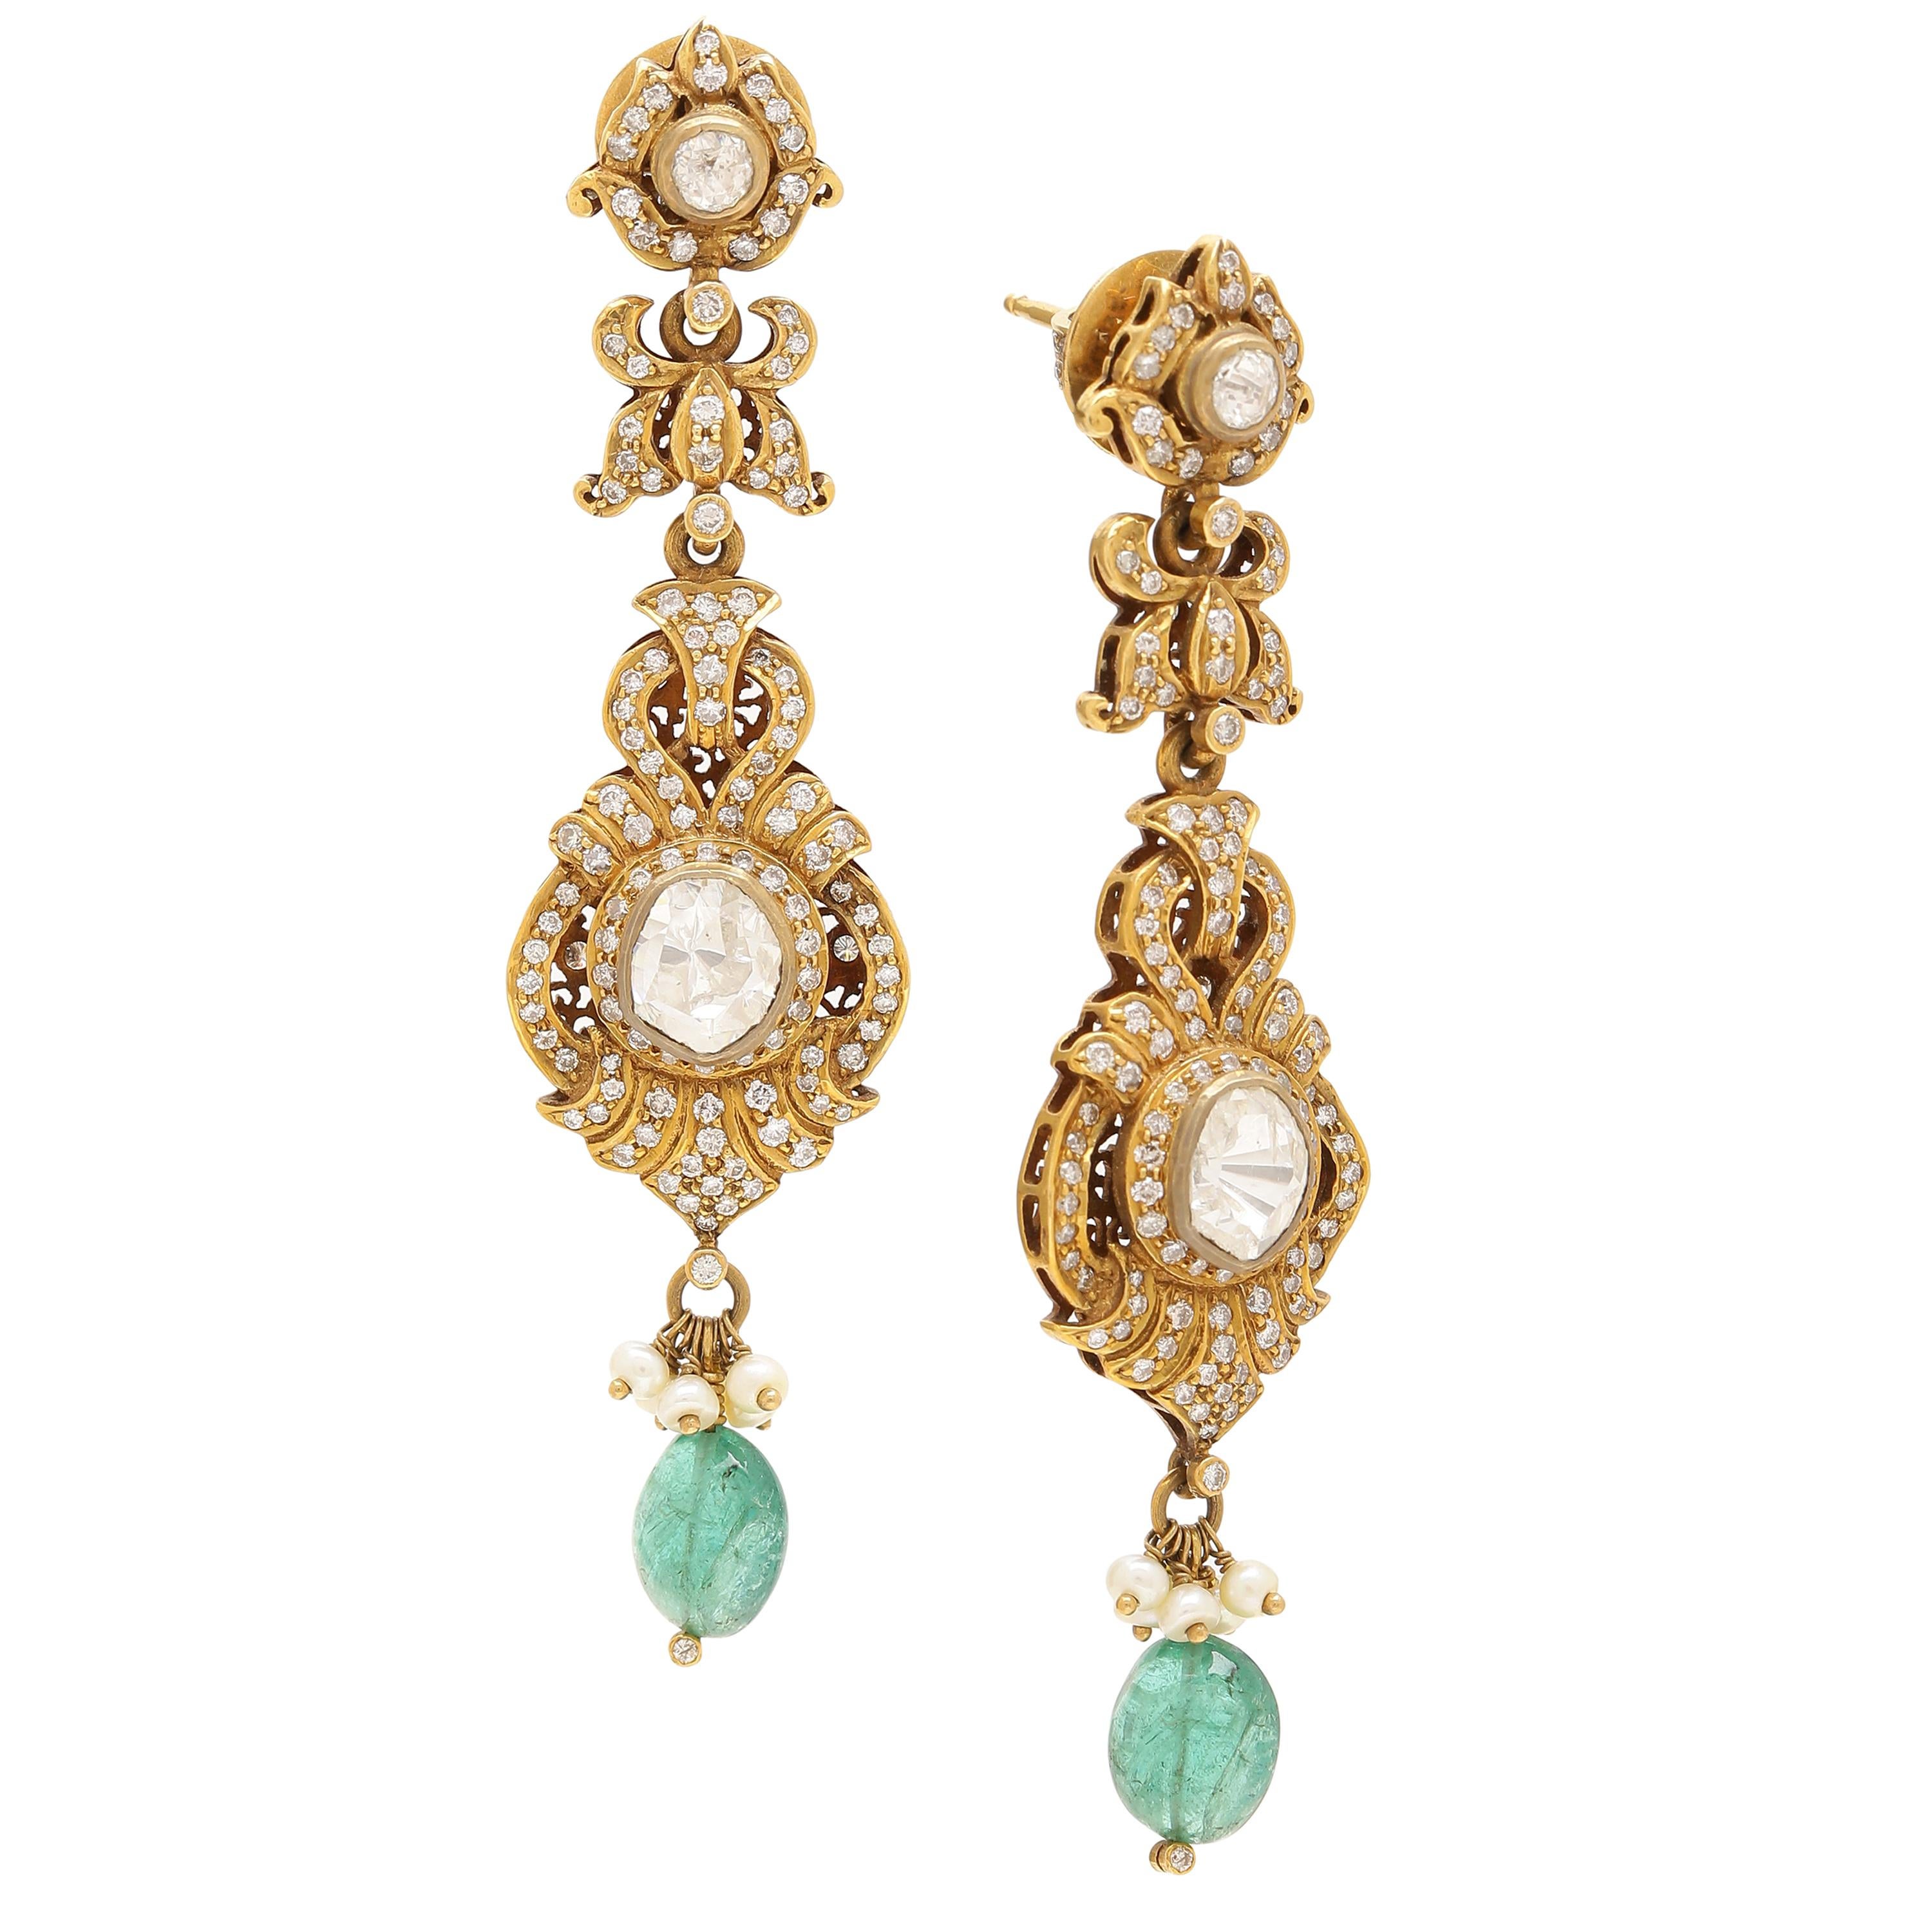 Earring with Diamonds, Pearls and Emeralds Handcrafted in 18 Karat Yellow Gold